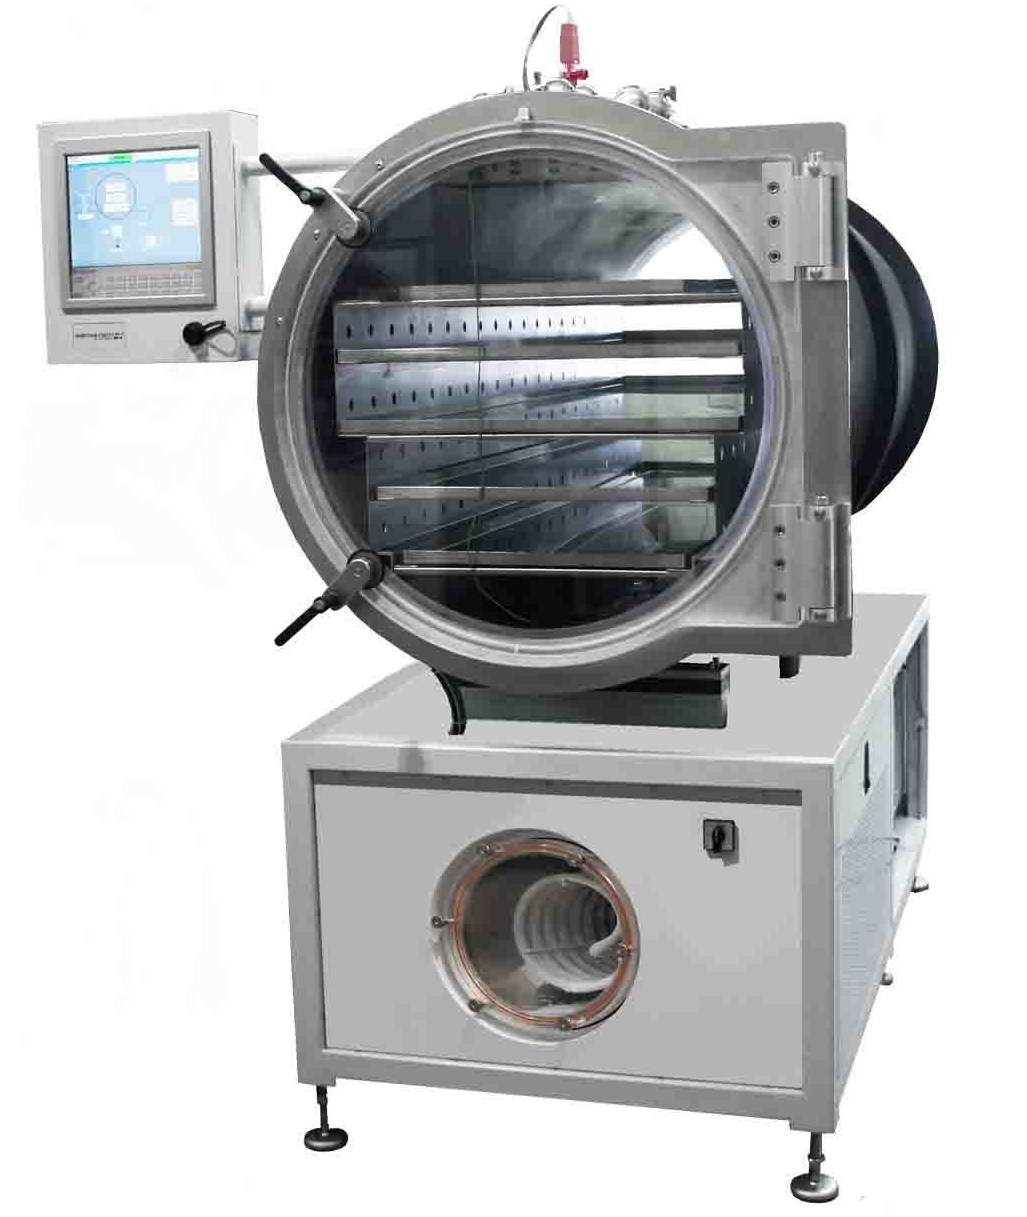 LyoDry Heritage Freeze Dryer has a total drying area of up to 5m2 across 5 removable trays. Fully automated with data logging, touch screen control and remote view option.